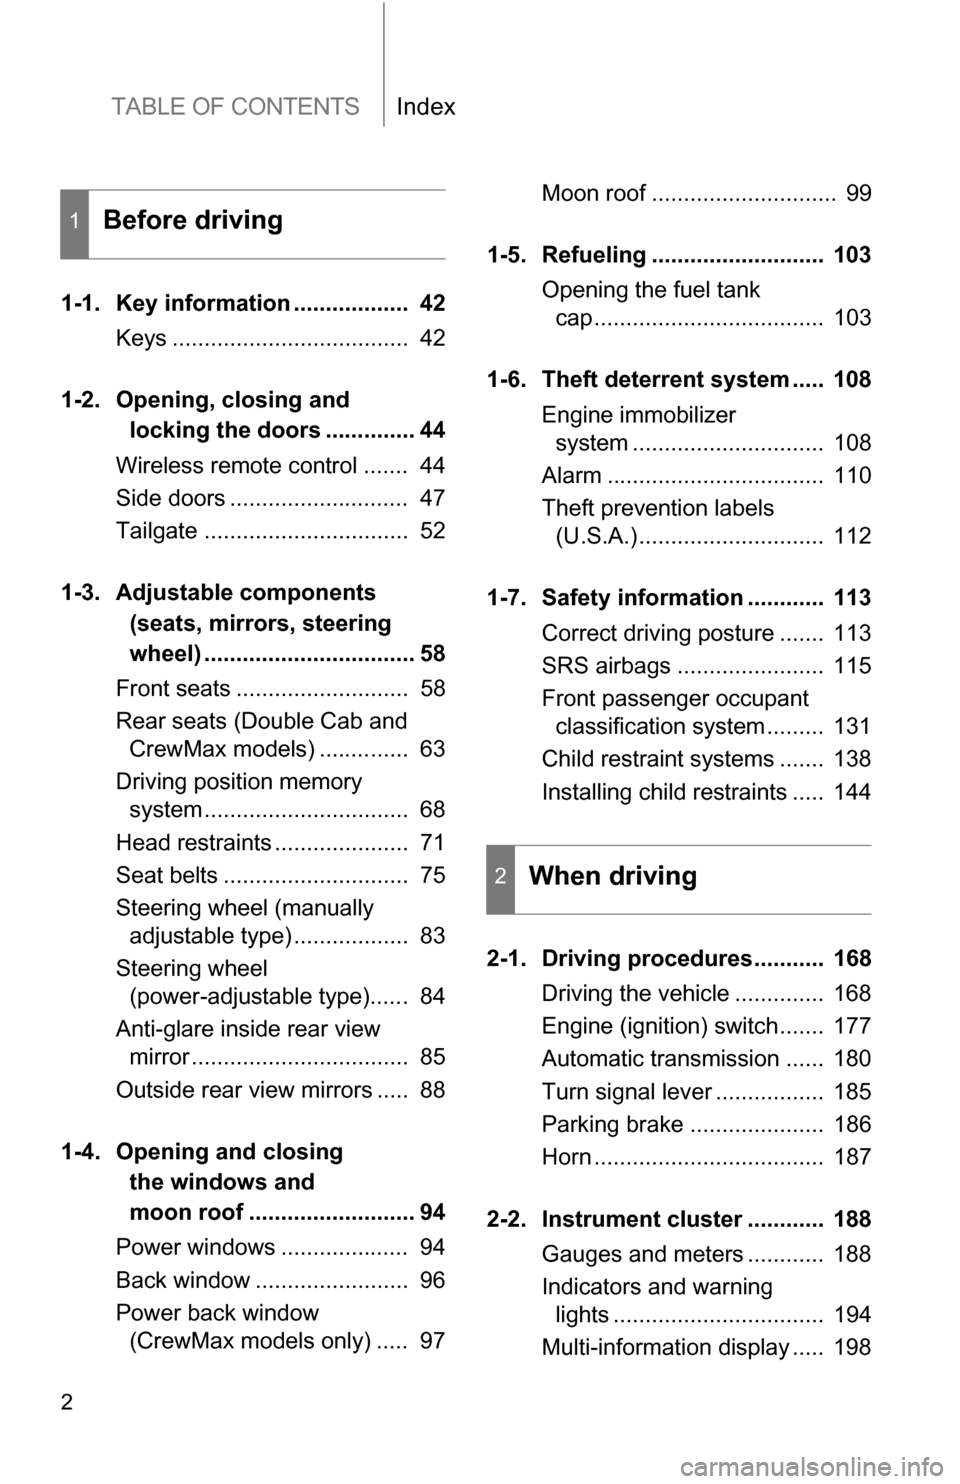 TOYOTA TUNDRA 2009 2.G Owners Manual TABLE OF CONTENTSIndex
2
1-1. Key information ..................  42Keys .....................................  42
1-2. Opening, closing  and
locking the doors .............. 44
Wireless remote contro